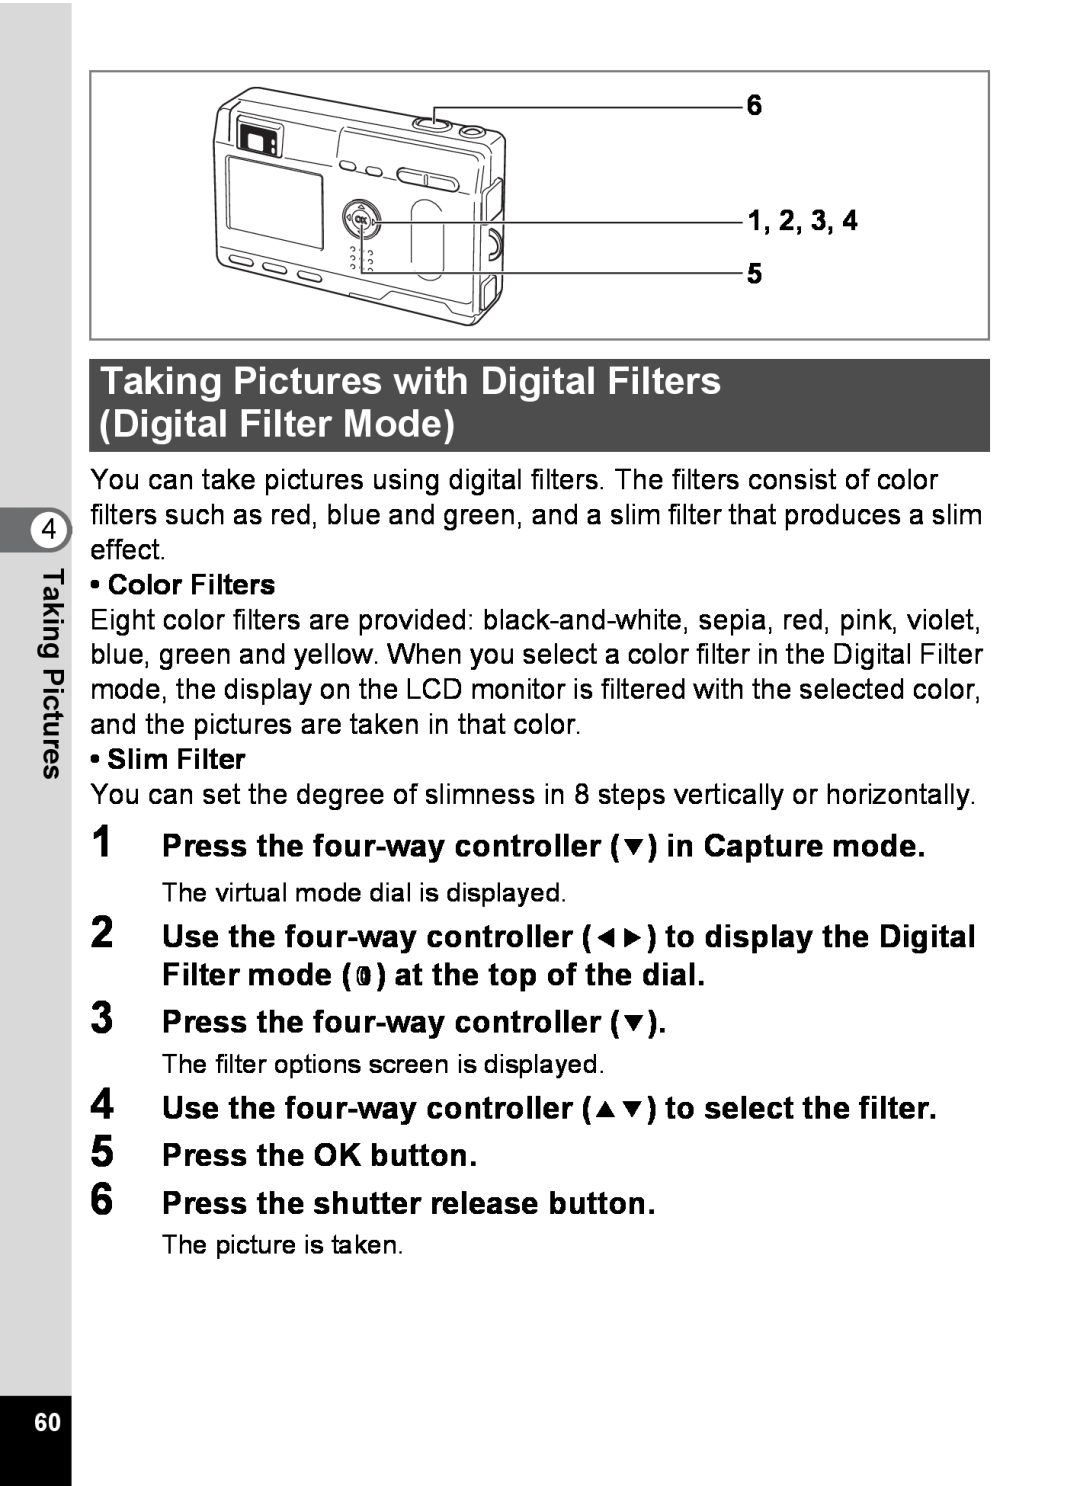 Pentax S4 manual Taking Pictures with Digital Filters Digital Filter Mode, Press the shutter release button, Color Filters 